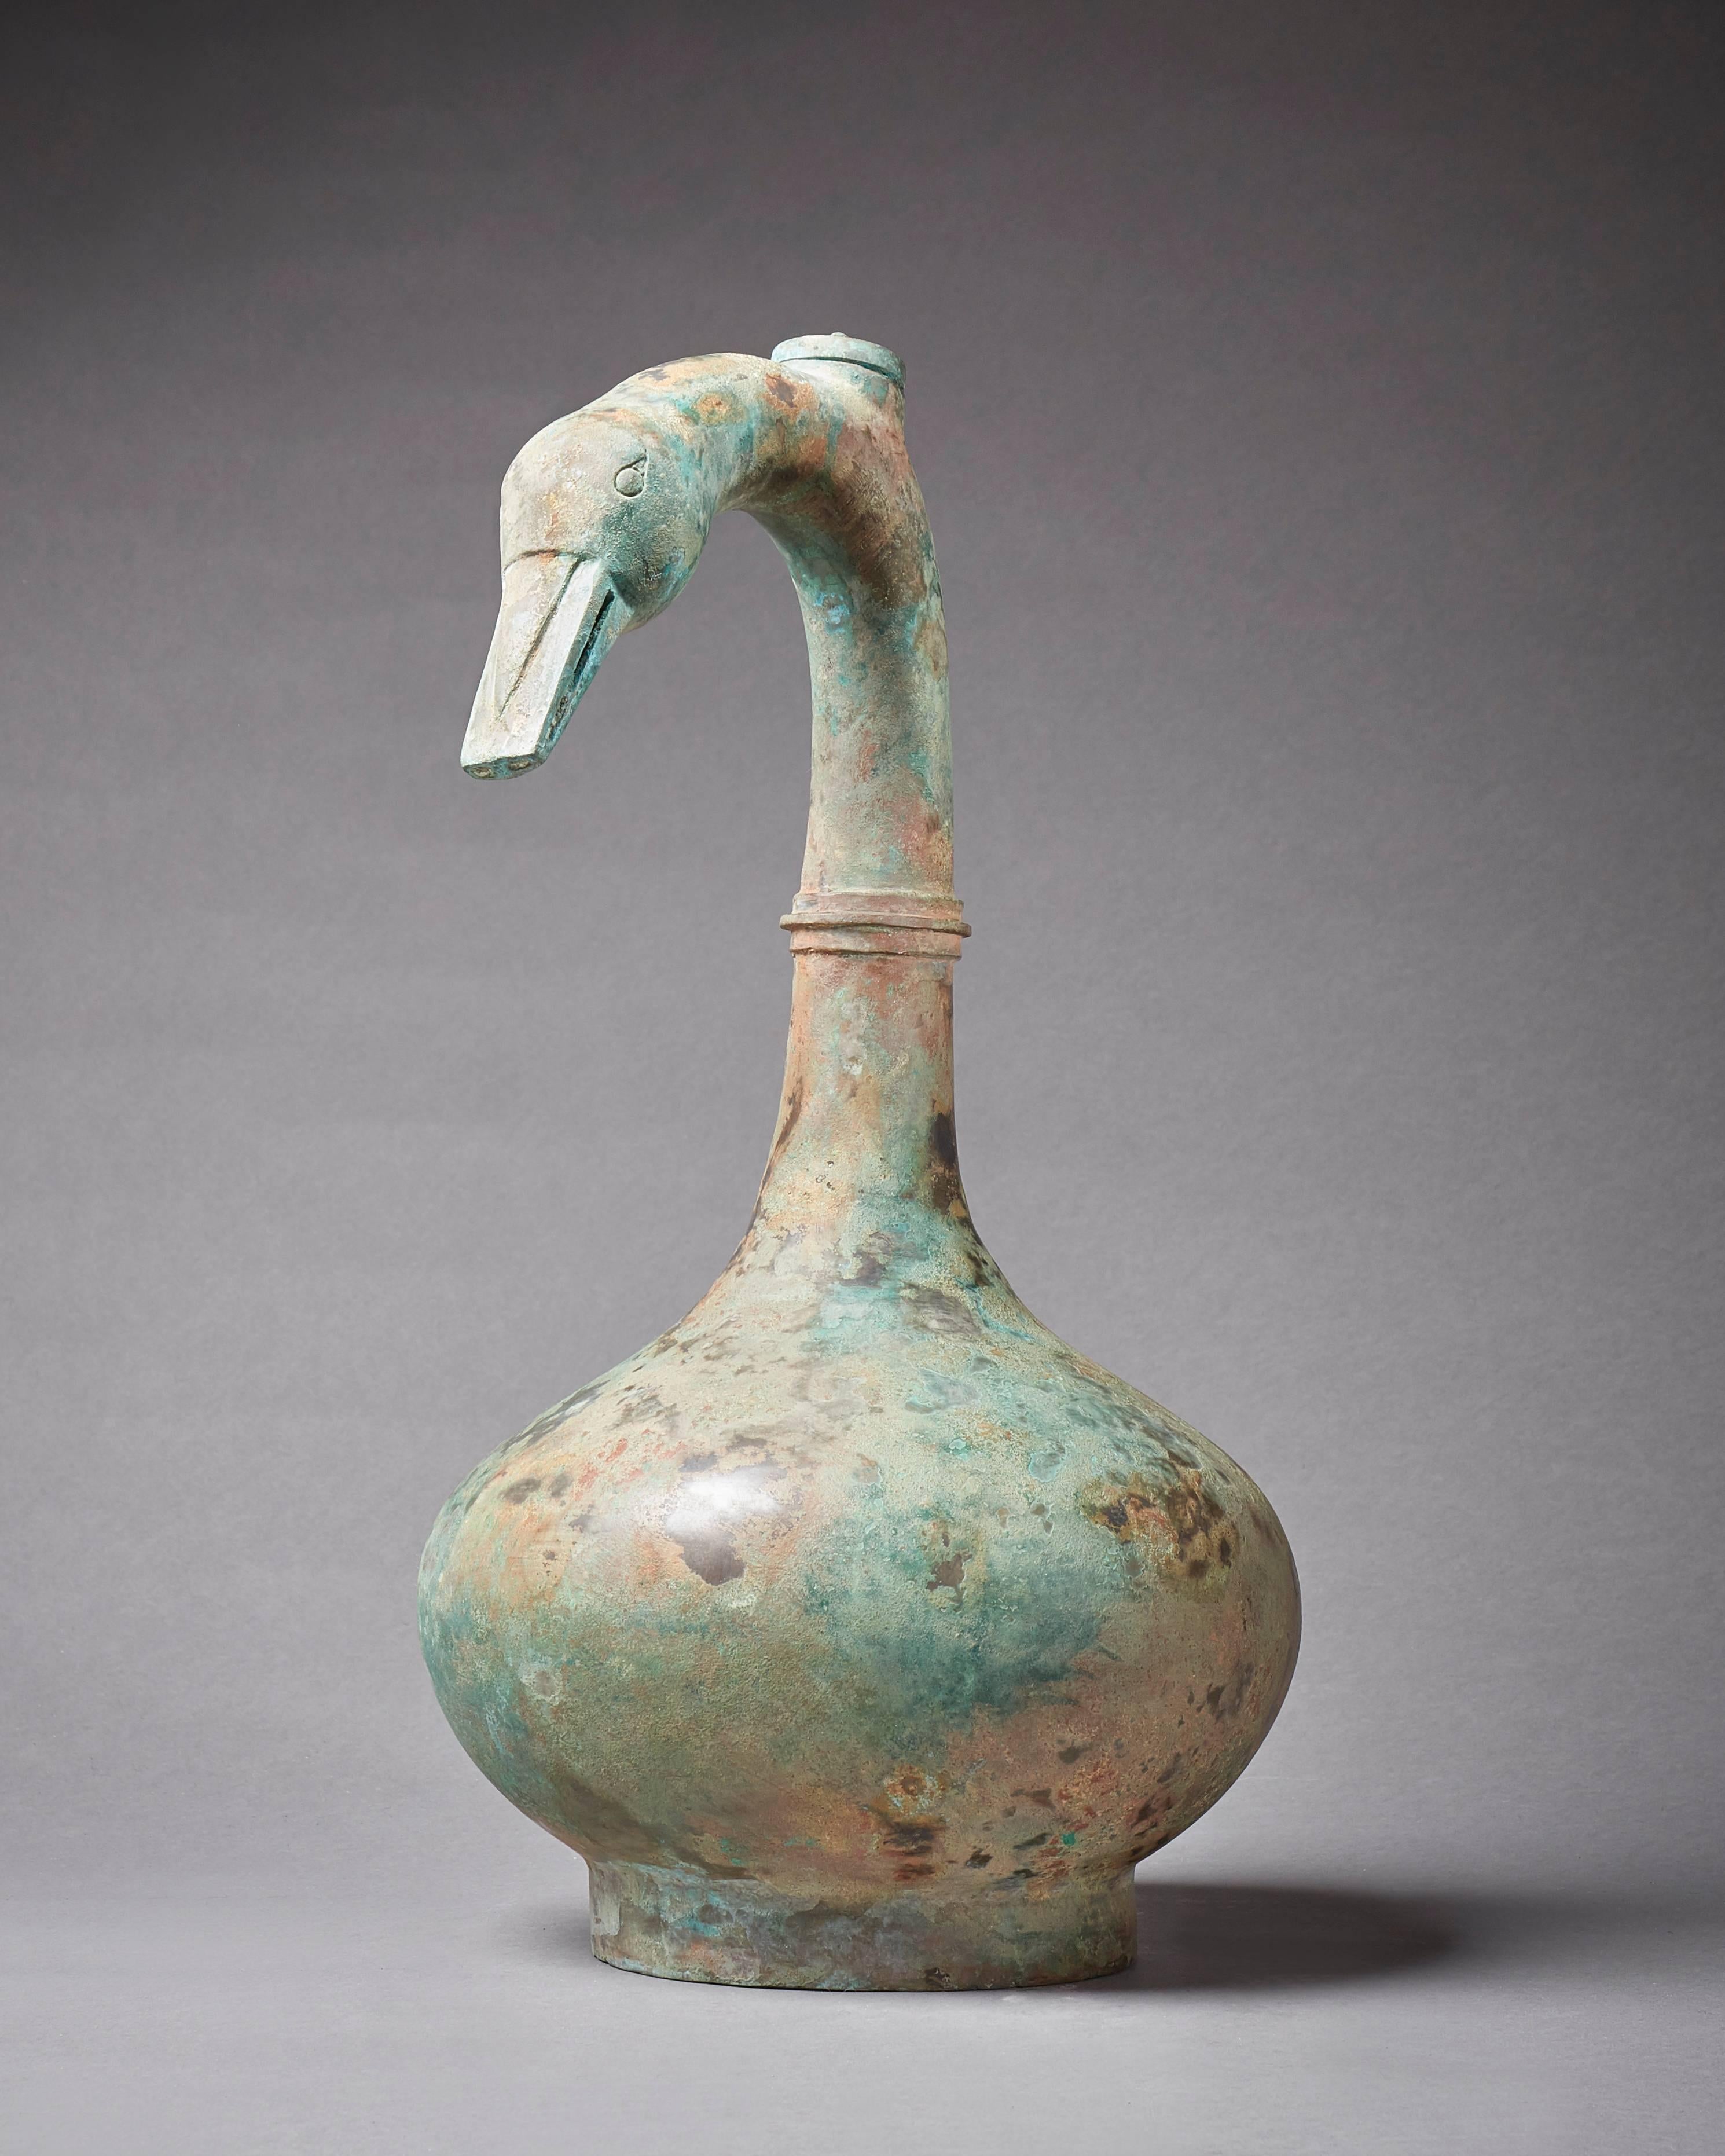 An ancient goose-neck vessel
The bulbous body raised on a circular foot, a rounded collar dividing the curved neck, a circular upright mouth rim at the crest and a simplified goose head at the tip
China
Han dynasty (206 B.C. - A.D.